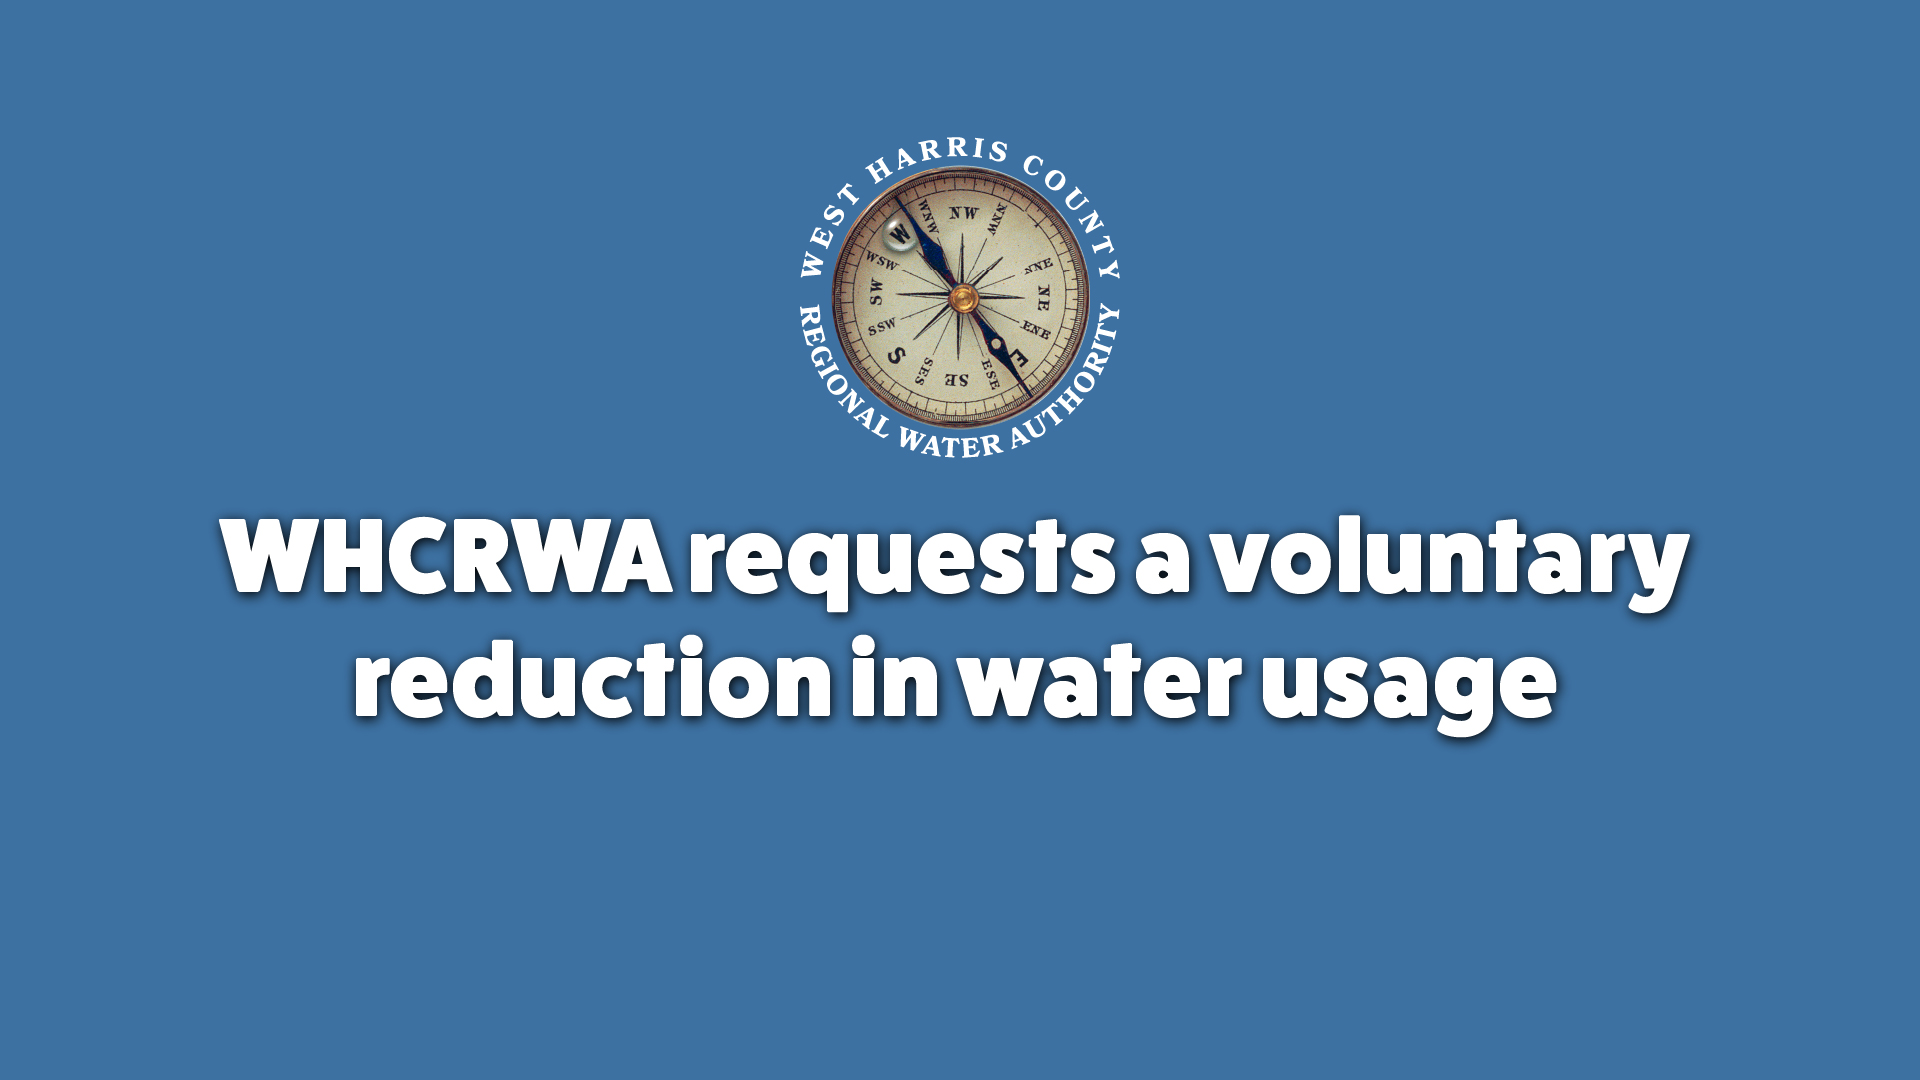 WHCRWA requests a voluntary reduction in water usage